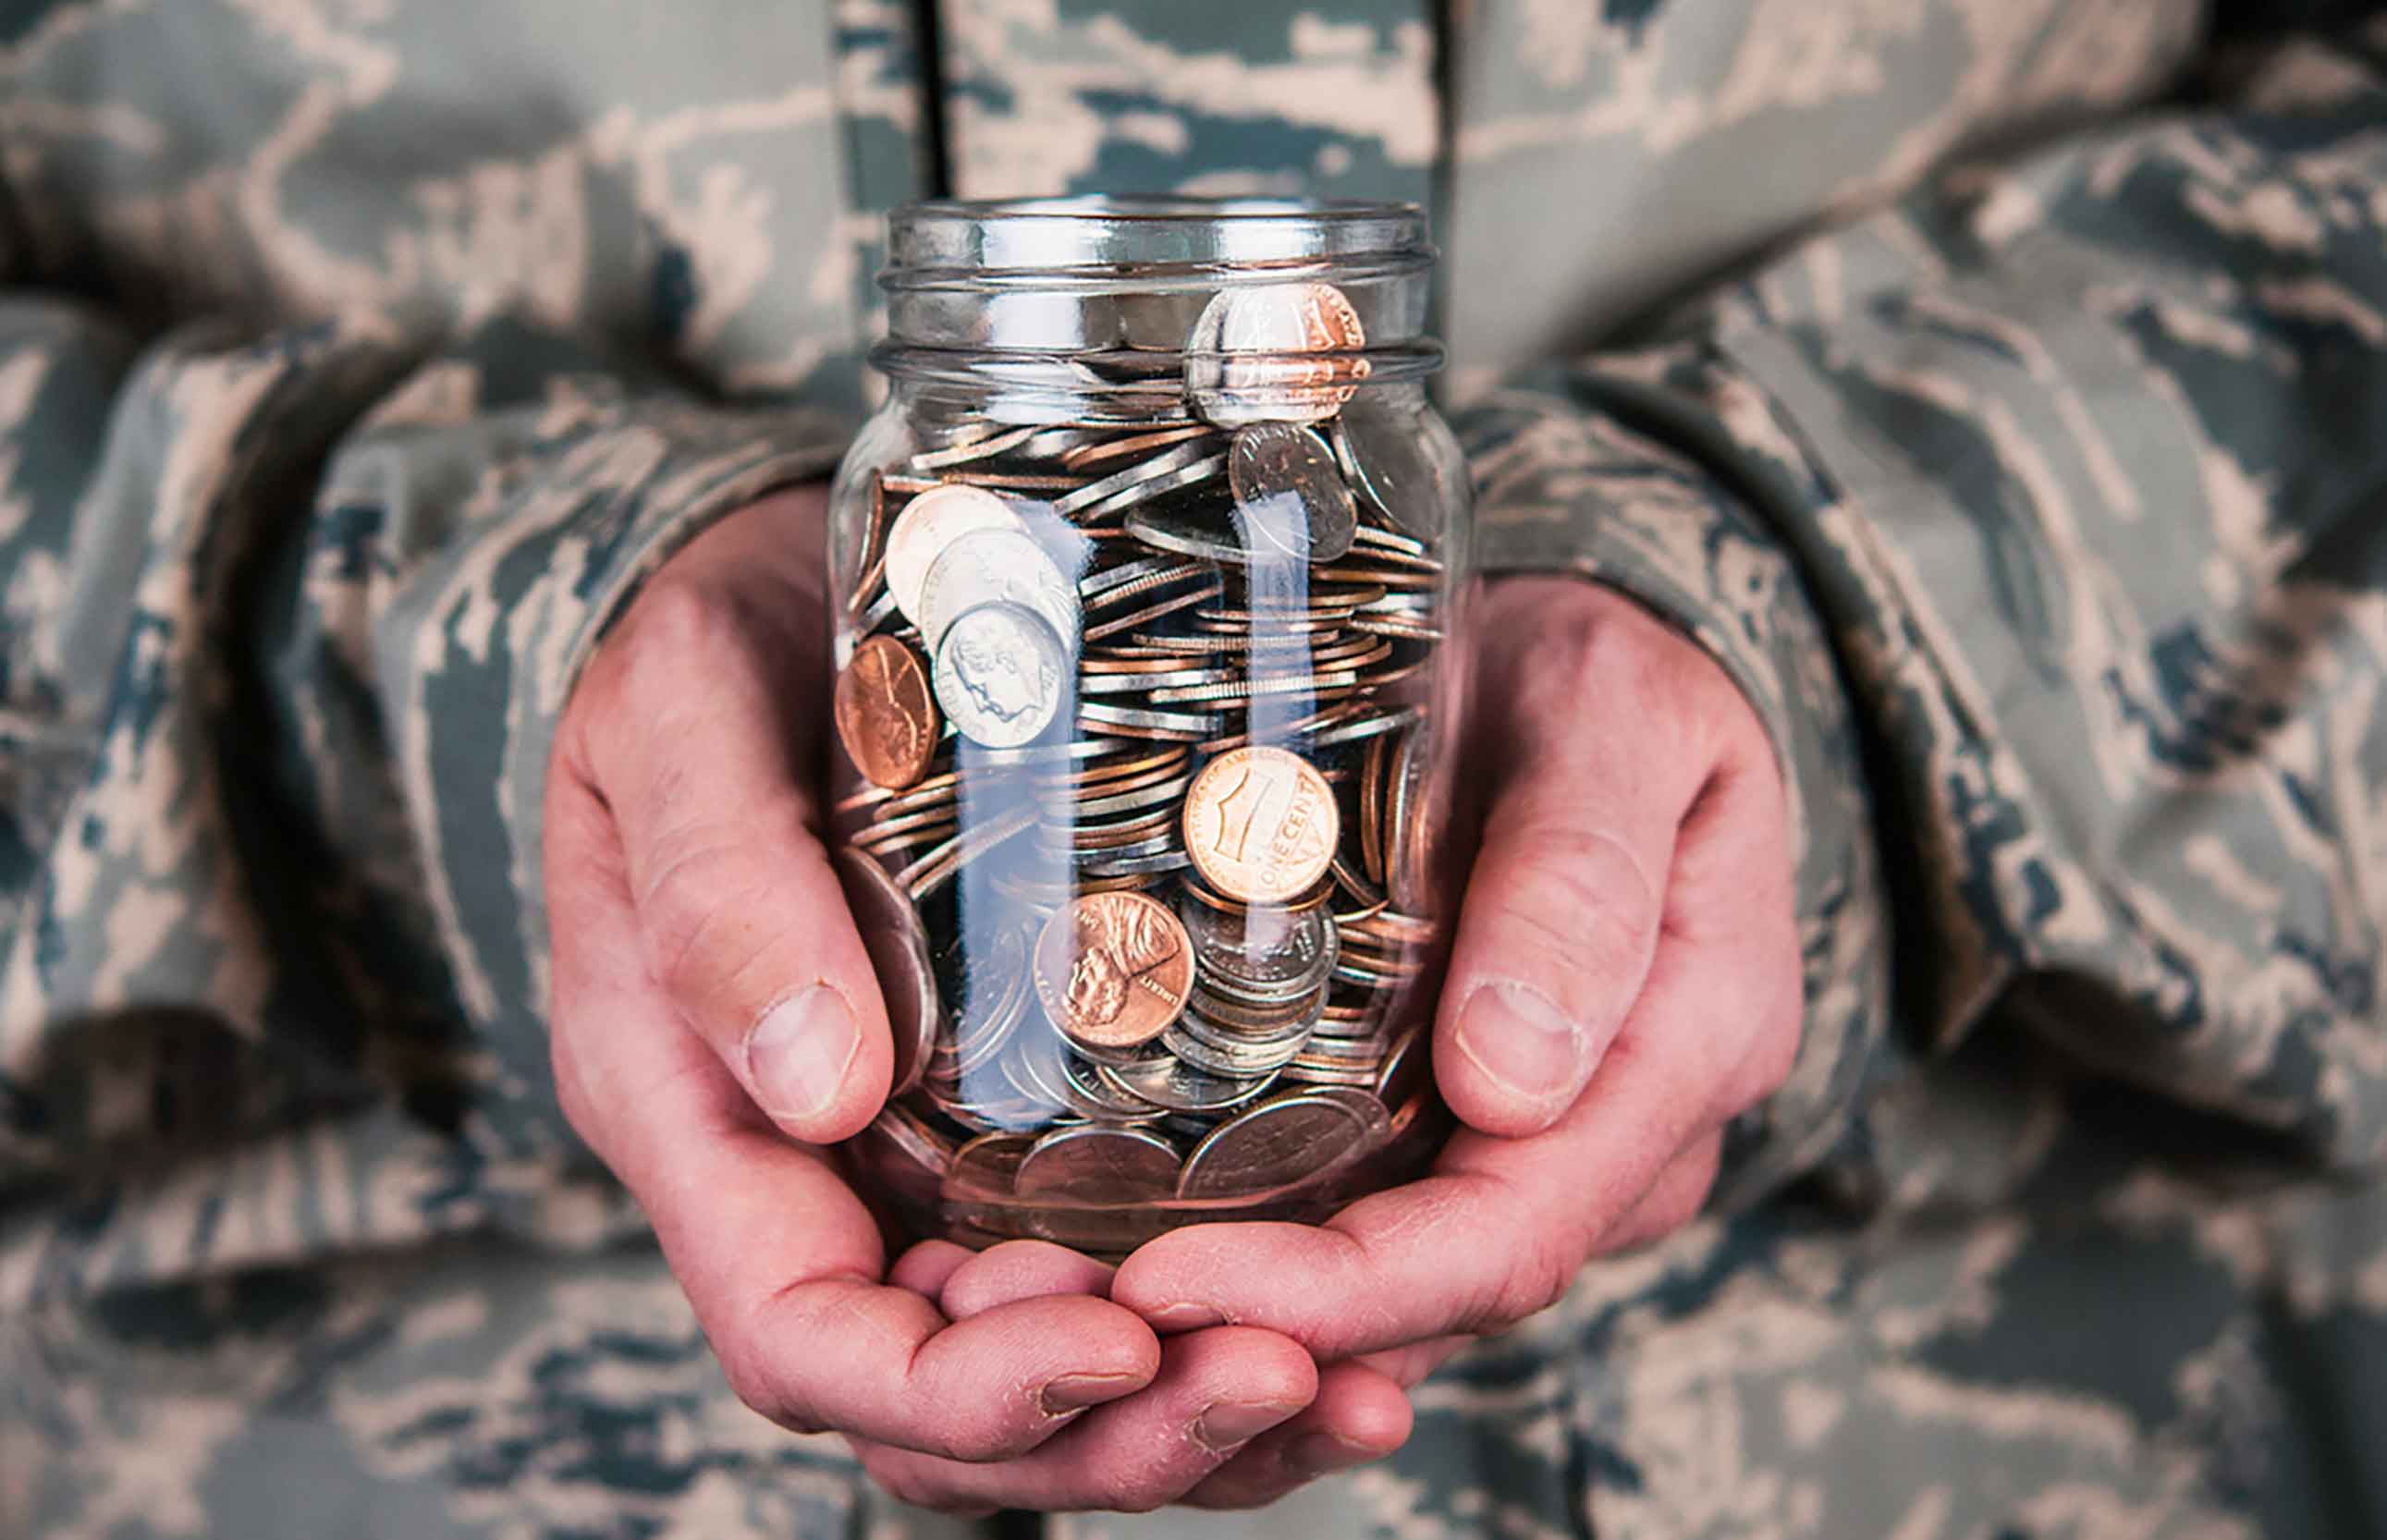 Money might not seem like a priority when it comes to the military, but it plays a much bigger role than you might think.